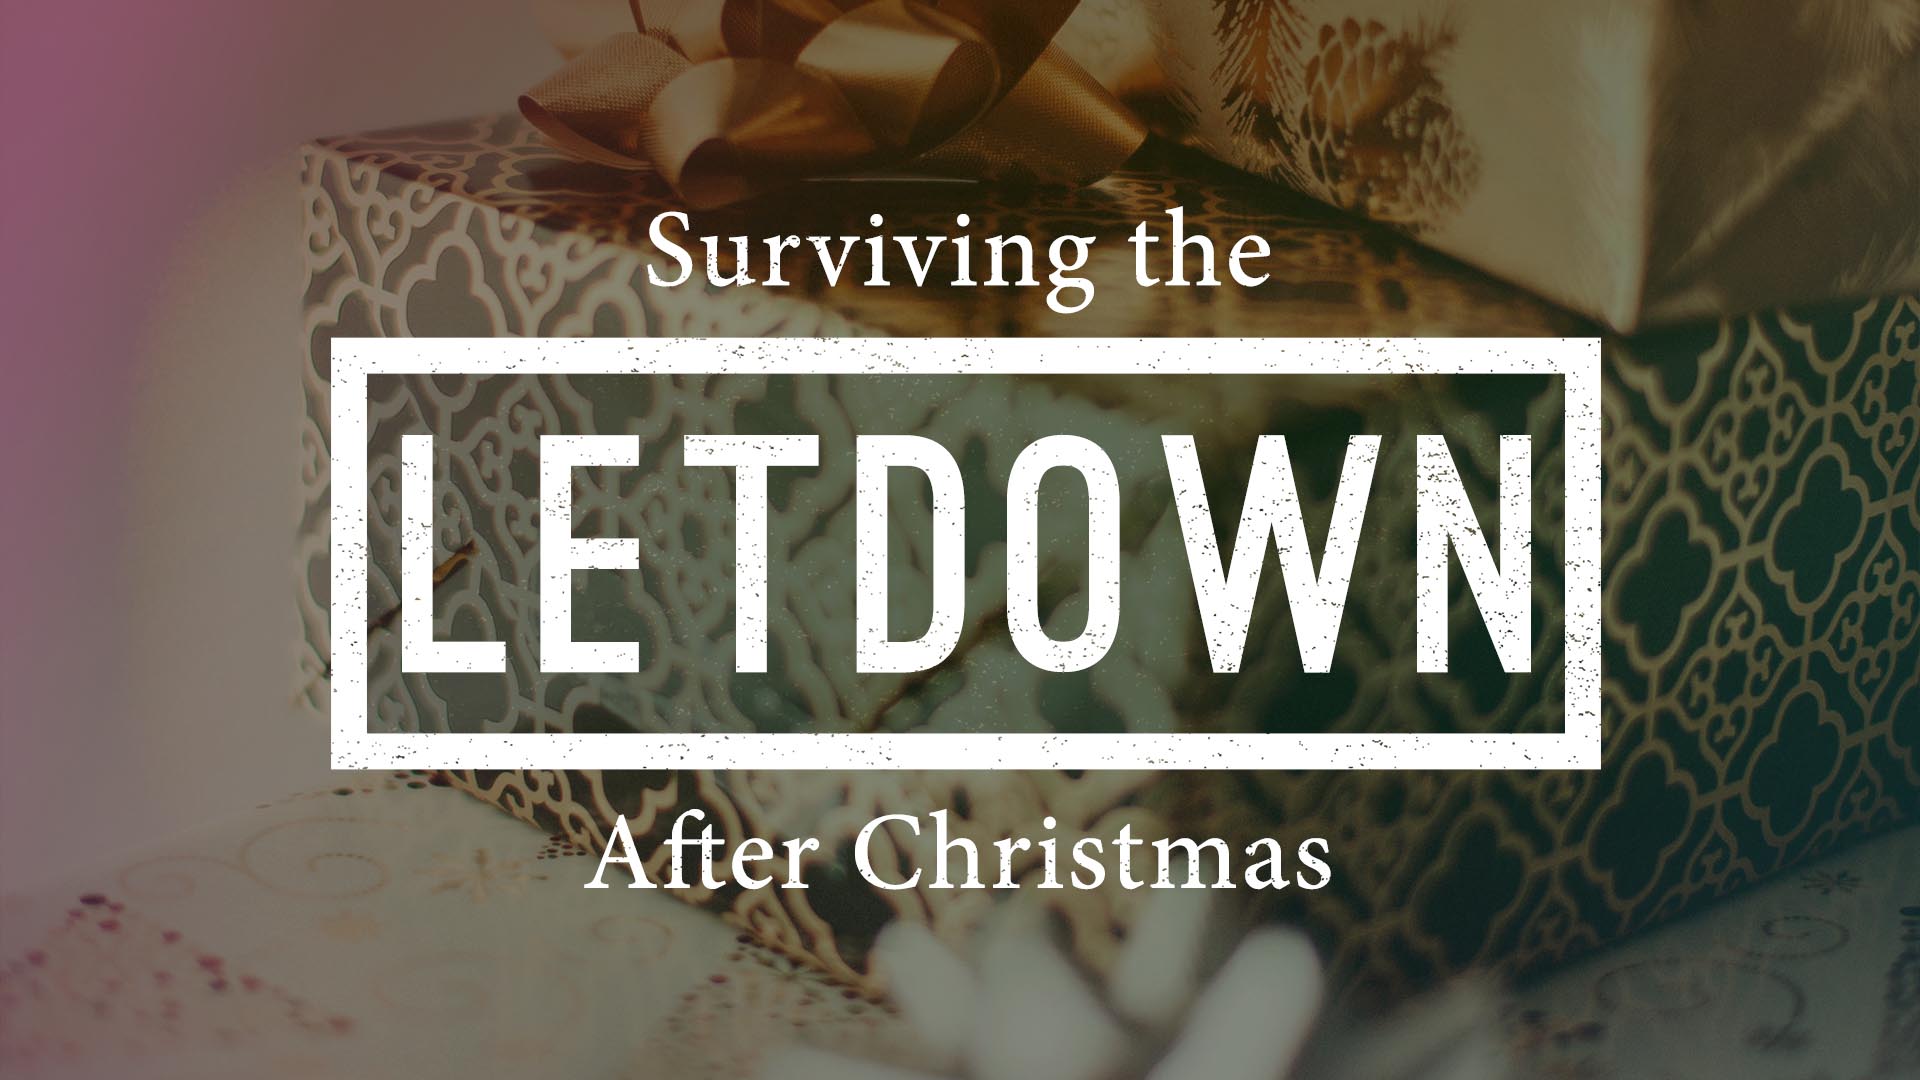 "Surviving The Letdown After Christmas" Message